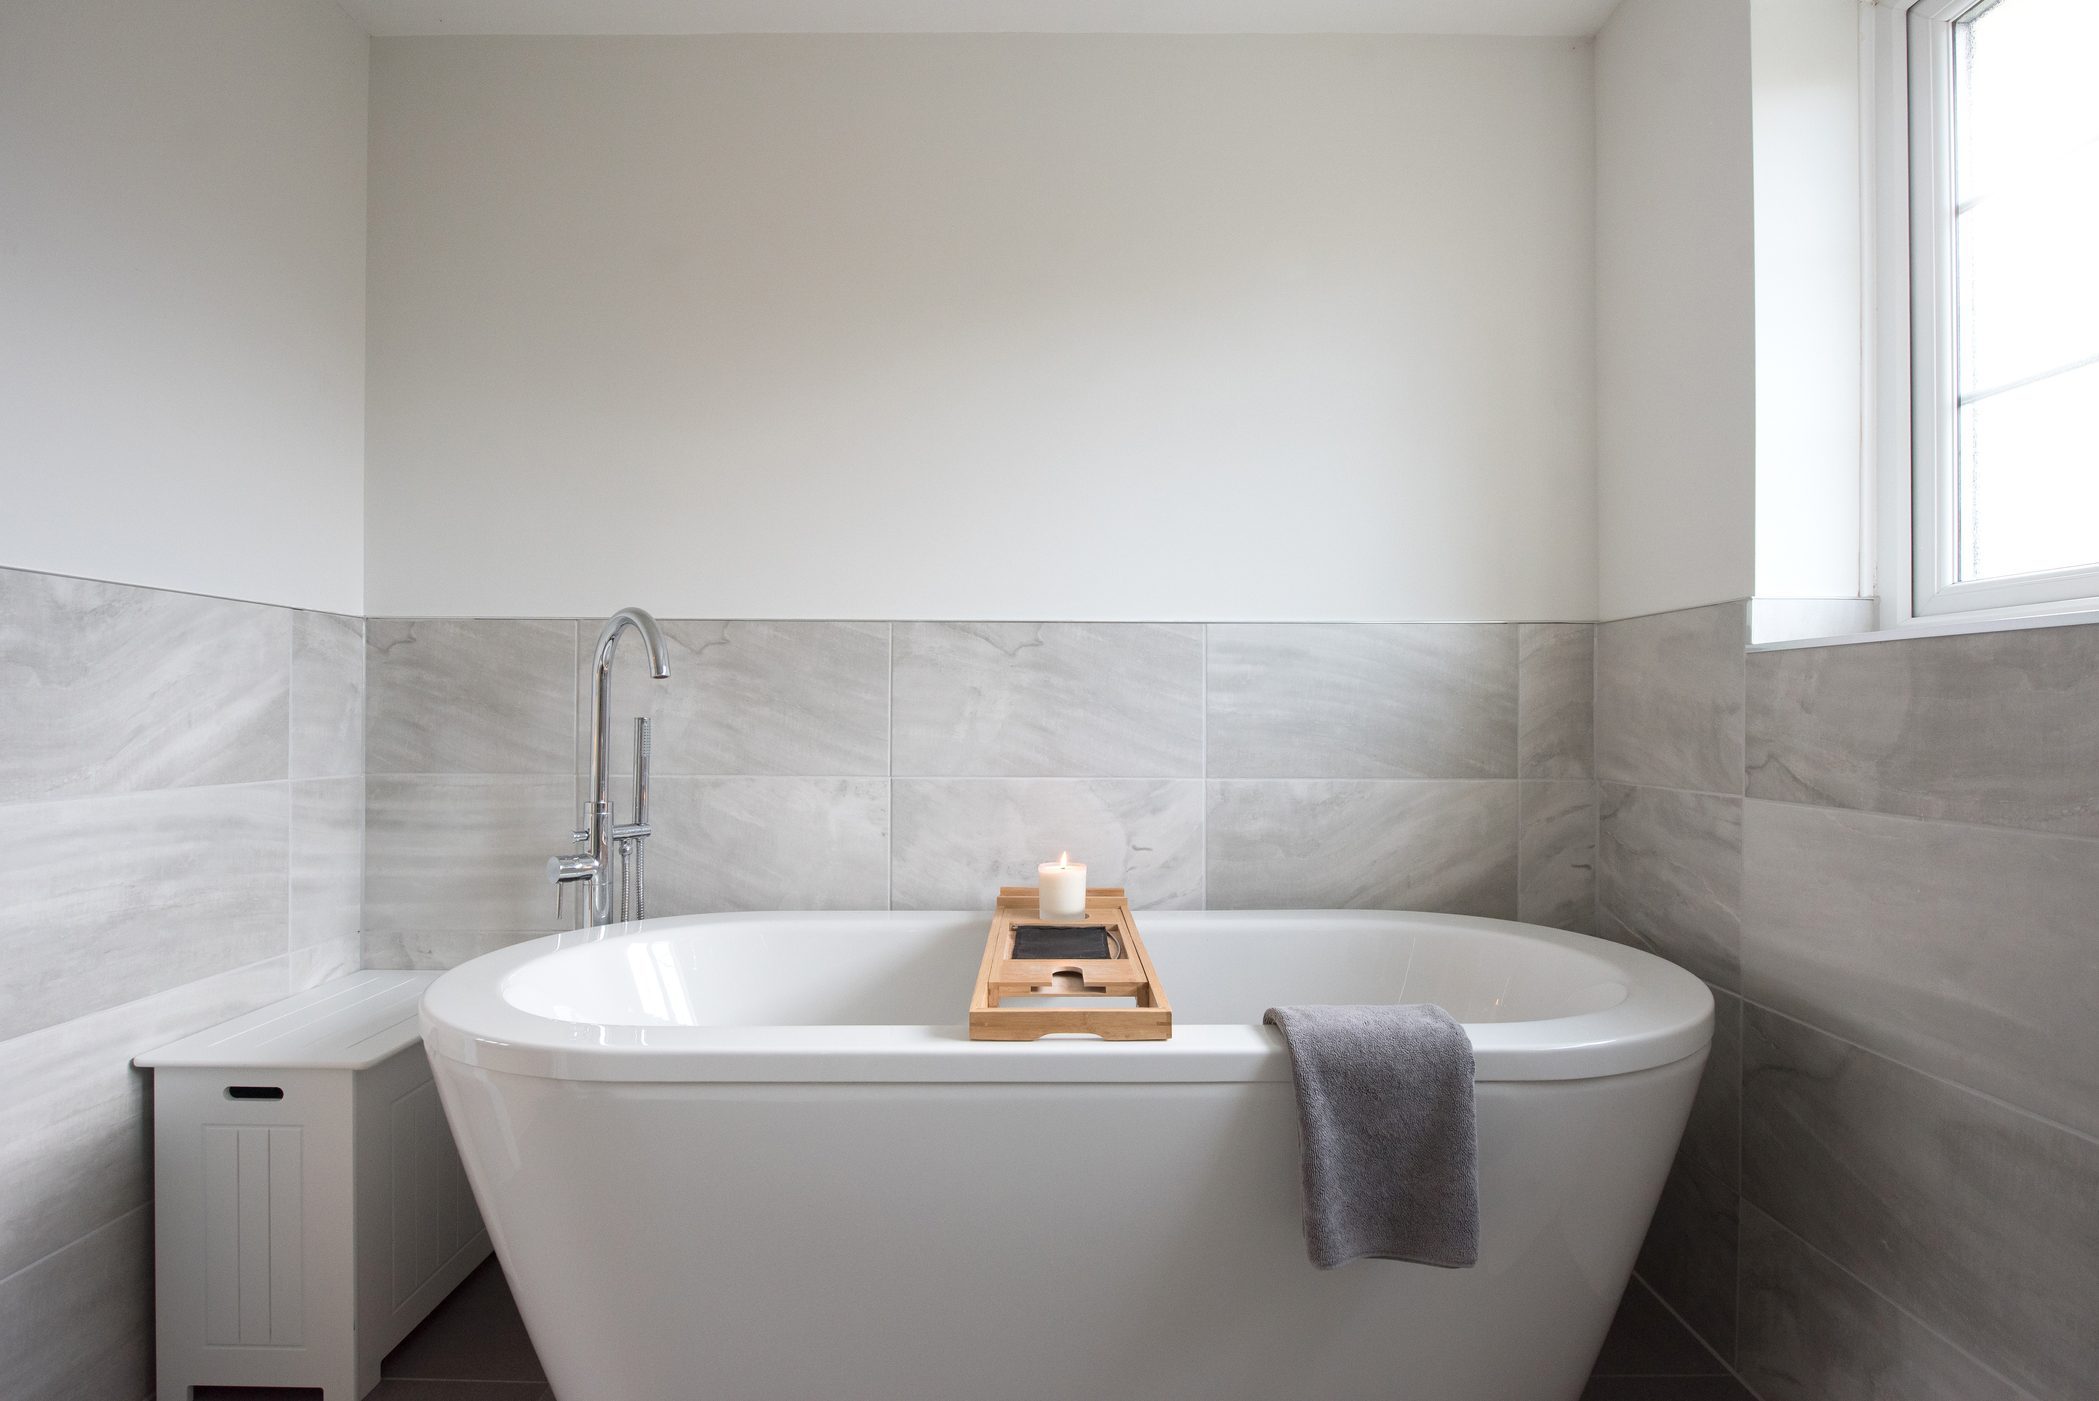 8 Types of Bathtubs: How to Choose the Right One